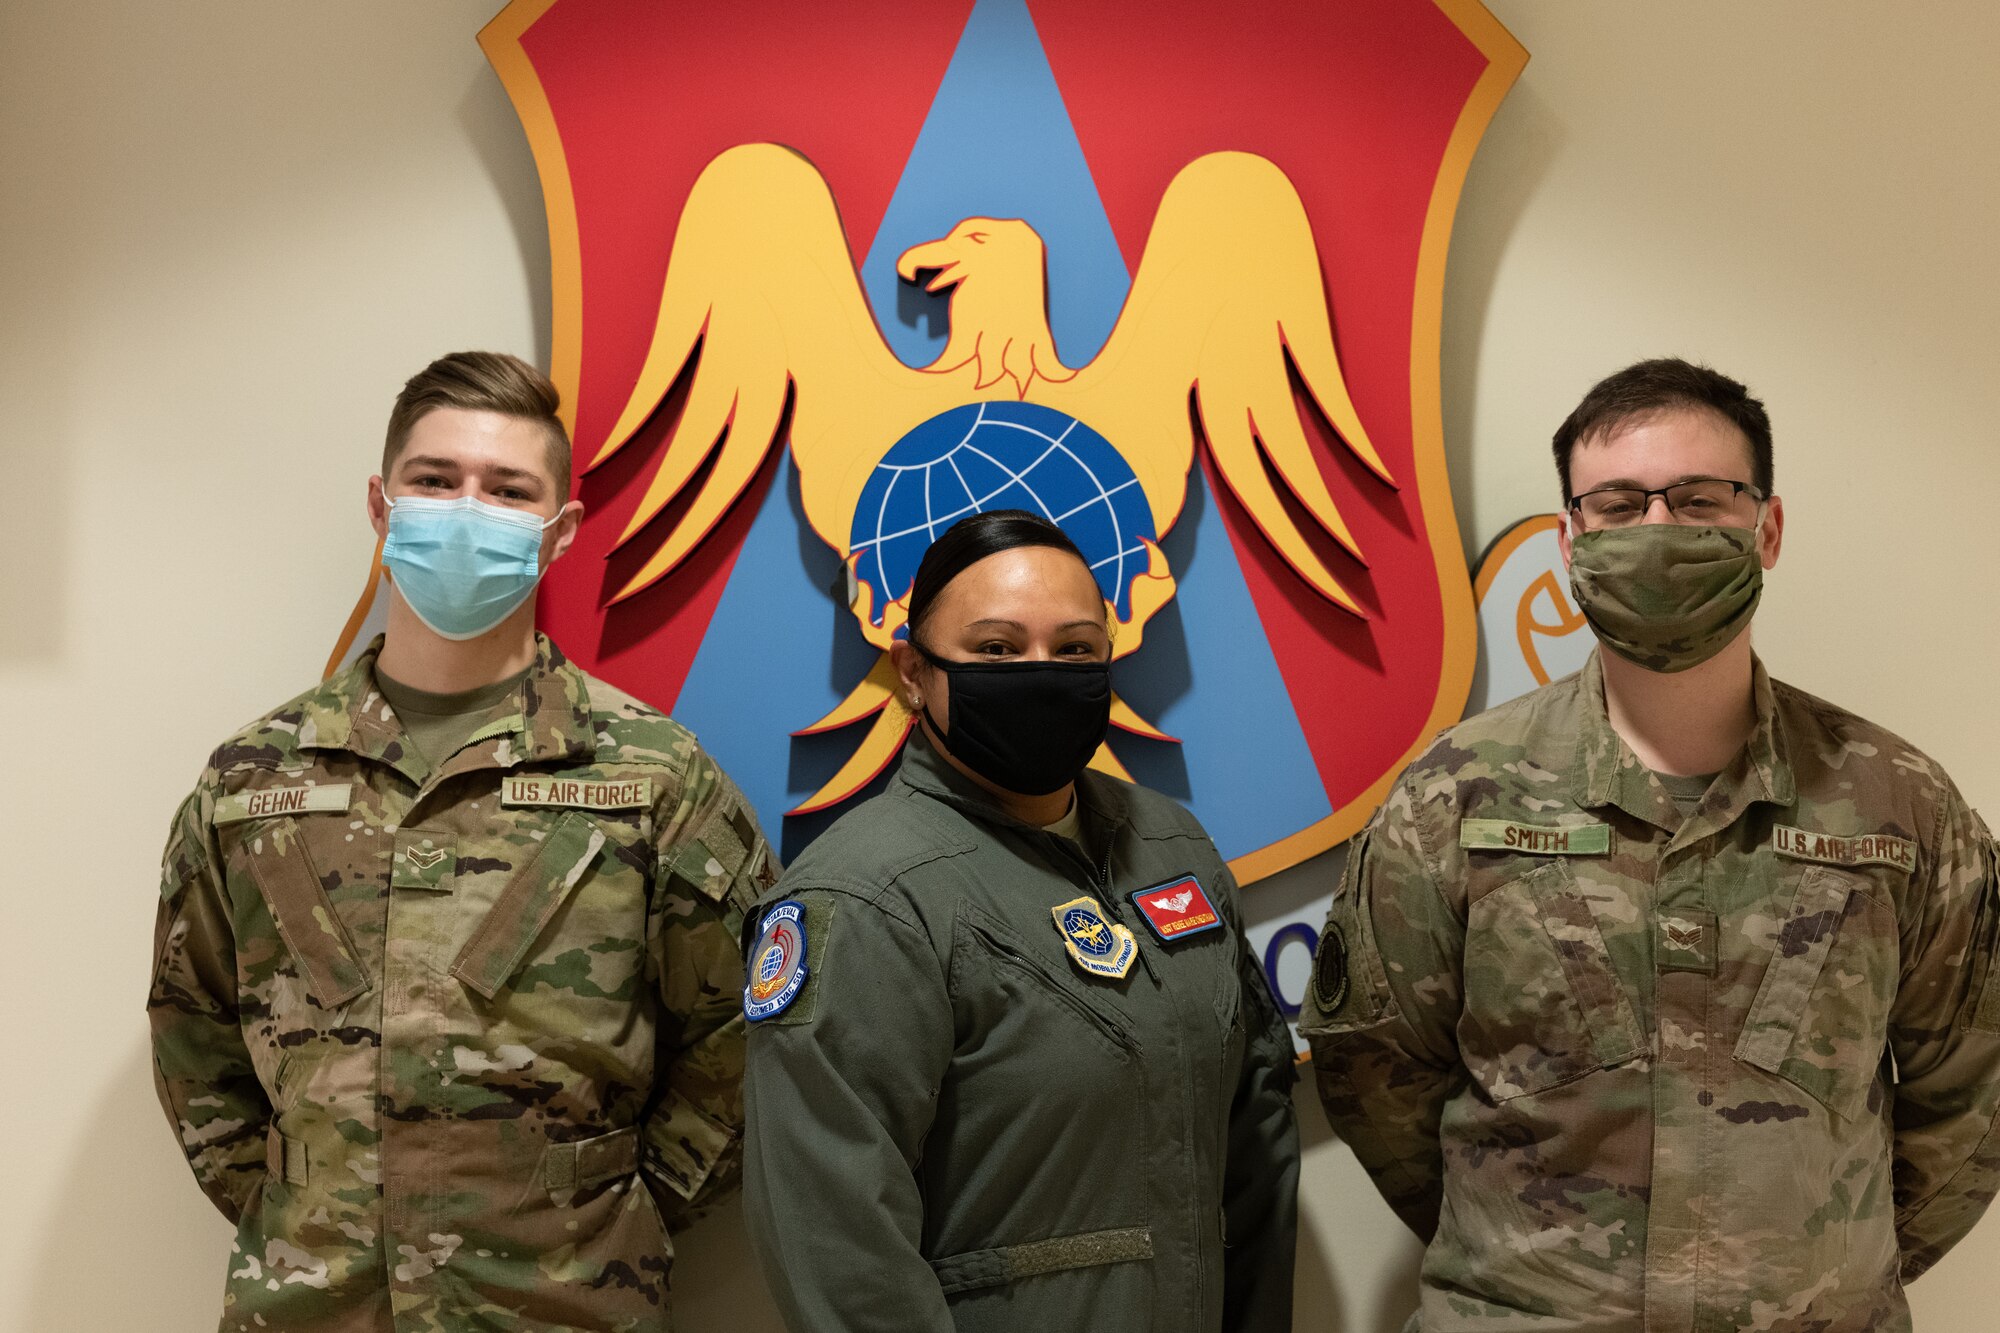 From left: Airman 1st Class James Gehne, 375th Civil Engineer Squadron firefighter, Master Sgt. Renee Cheatham, 375th Aeromedical Evacuation Squadron technician, and Senior Airman Matthew Smith, 375th Security Forces patrolman, are the first three members of Team Scott to receive a COVID-19 inoculation on Scott Air Force Base, Ill., Jan 6, 2021. The Department of Defense prioritizes personnel to receive the vaccines based on Center of Disease Control guidance and the DoD COVID Task Force’s assessment of unique DoD mission requirements. The DoD Prioritization Schema prioritizes those providing direct medical care, maintaining essential national security and installation functions, deploying forces and beneficiaries at the highest risk for developing serious illness before other members of the DoD population. (U.S. Air Force photo by Tech. Sgt. Jordan Castelan)